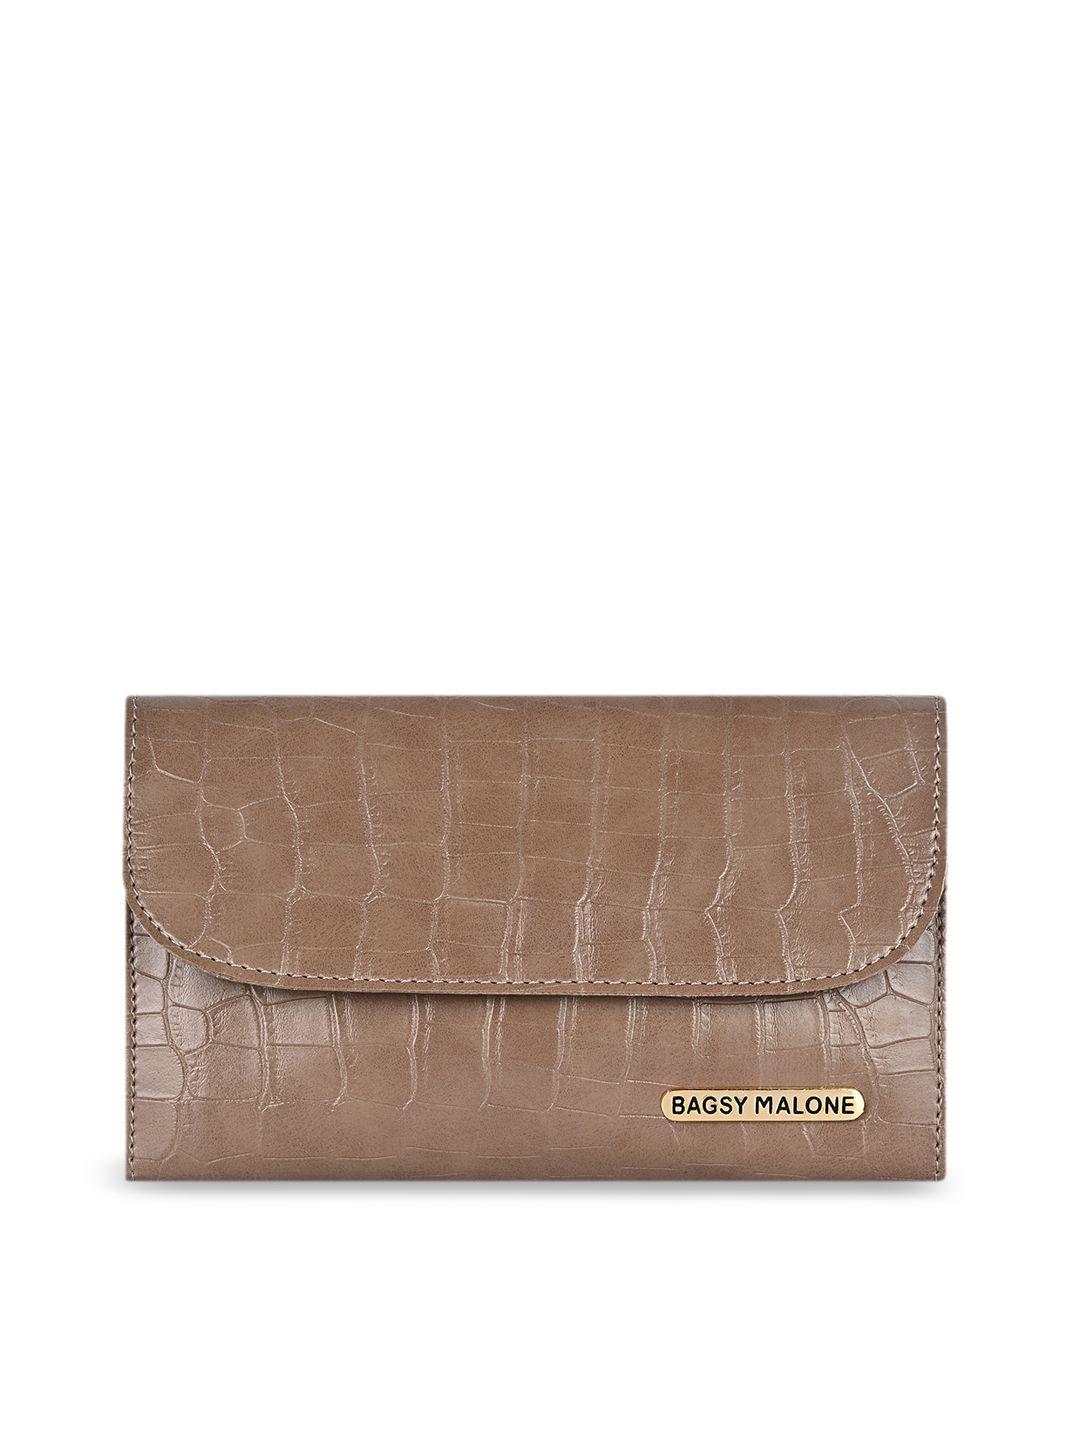 bagsy malone camel brown textured envelope clutch